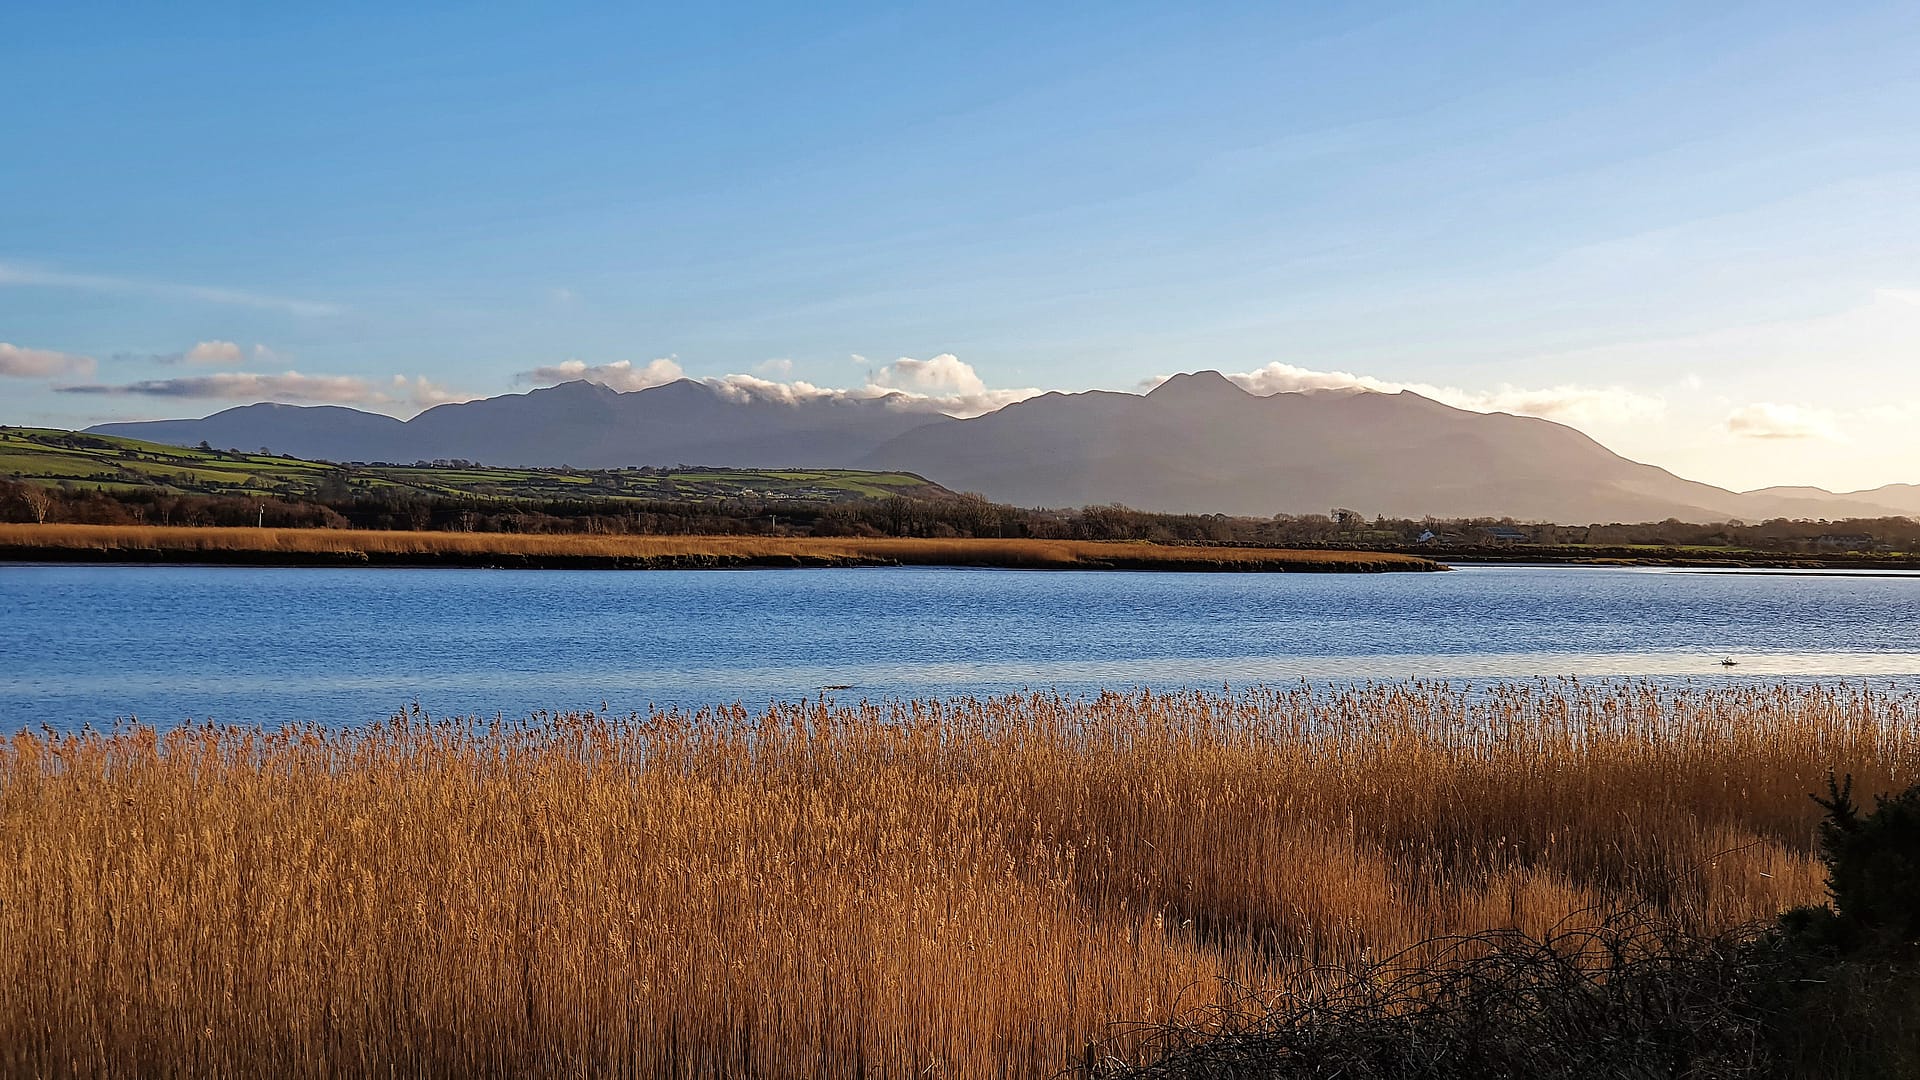 The estuary of the Maine River with the McGillicuddy Reeks mountains in the background